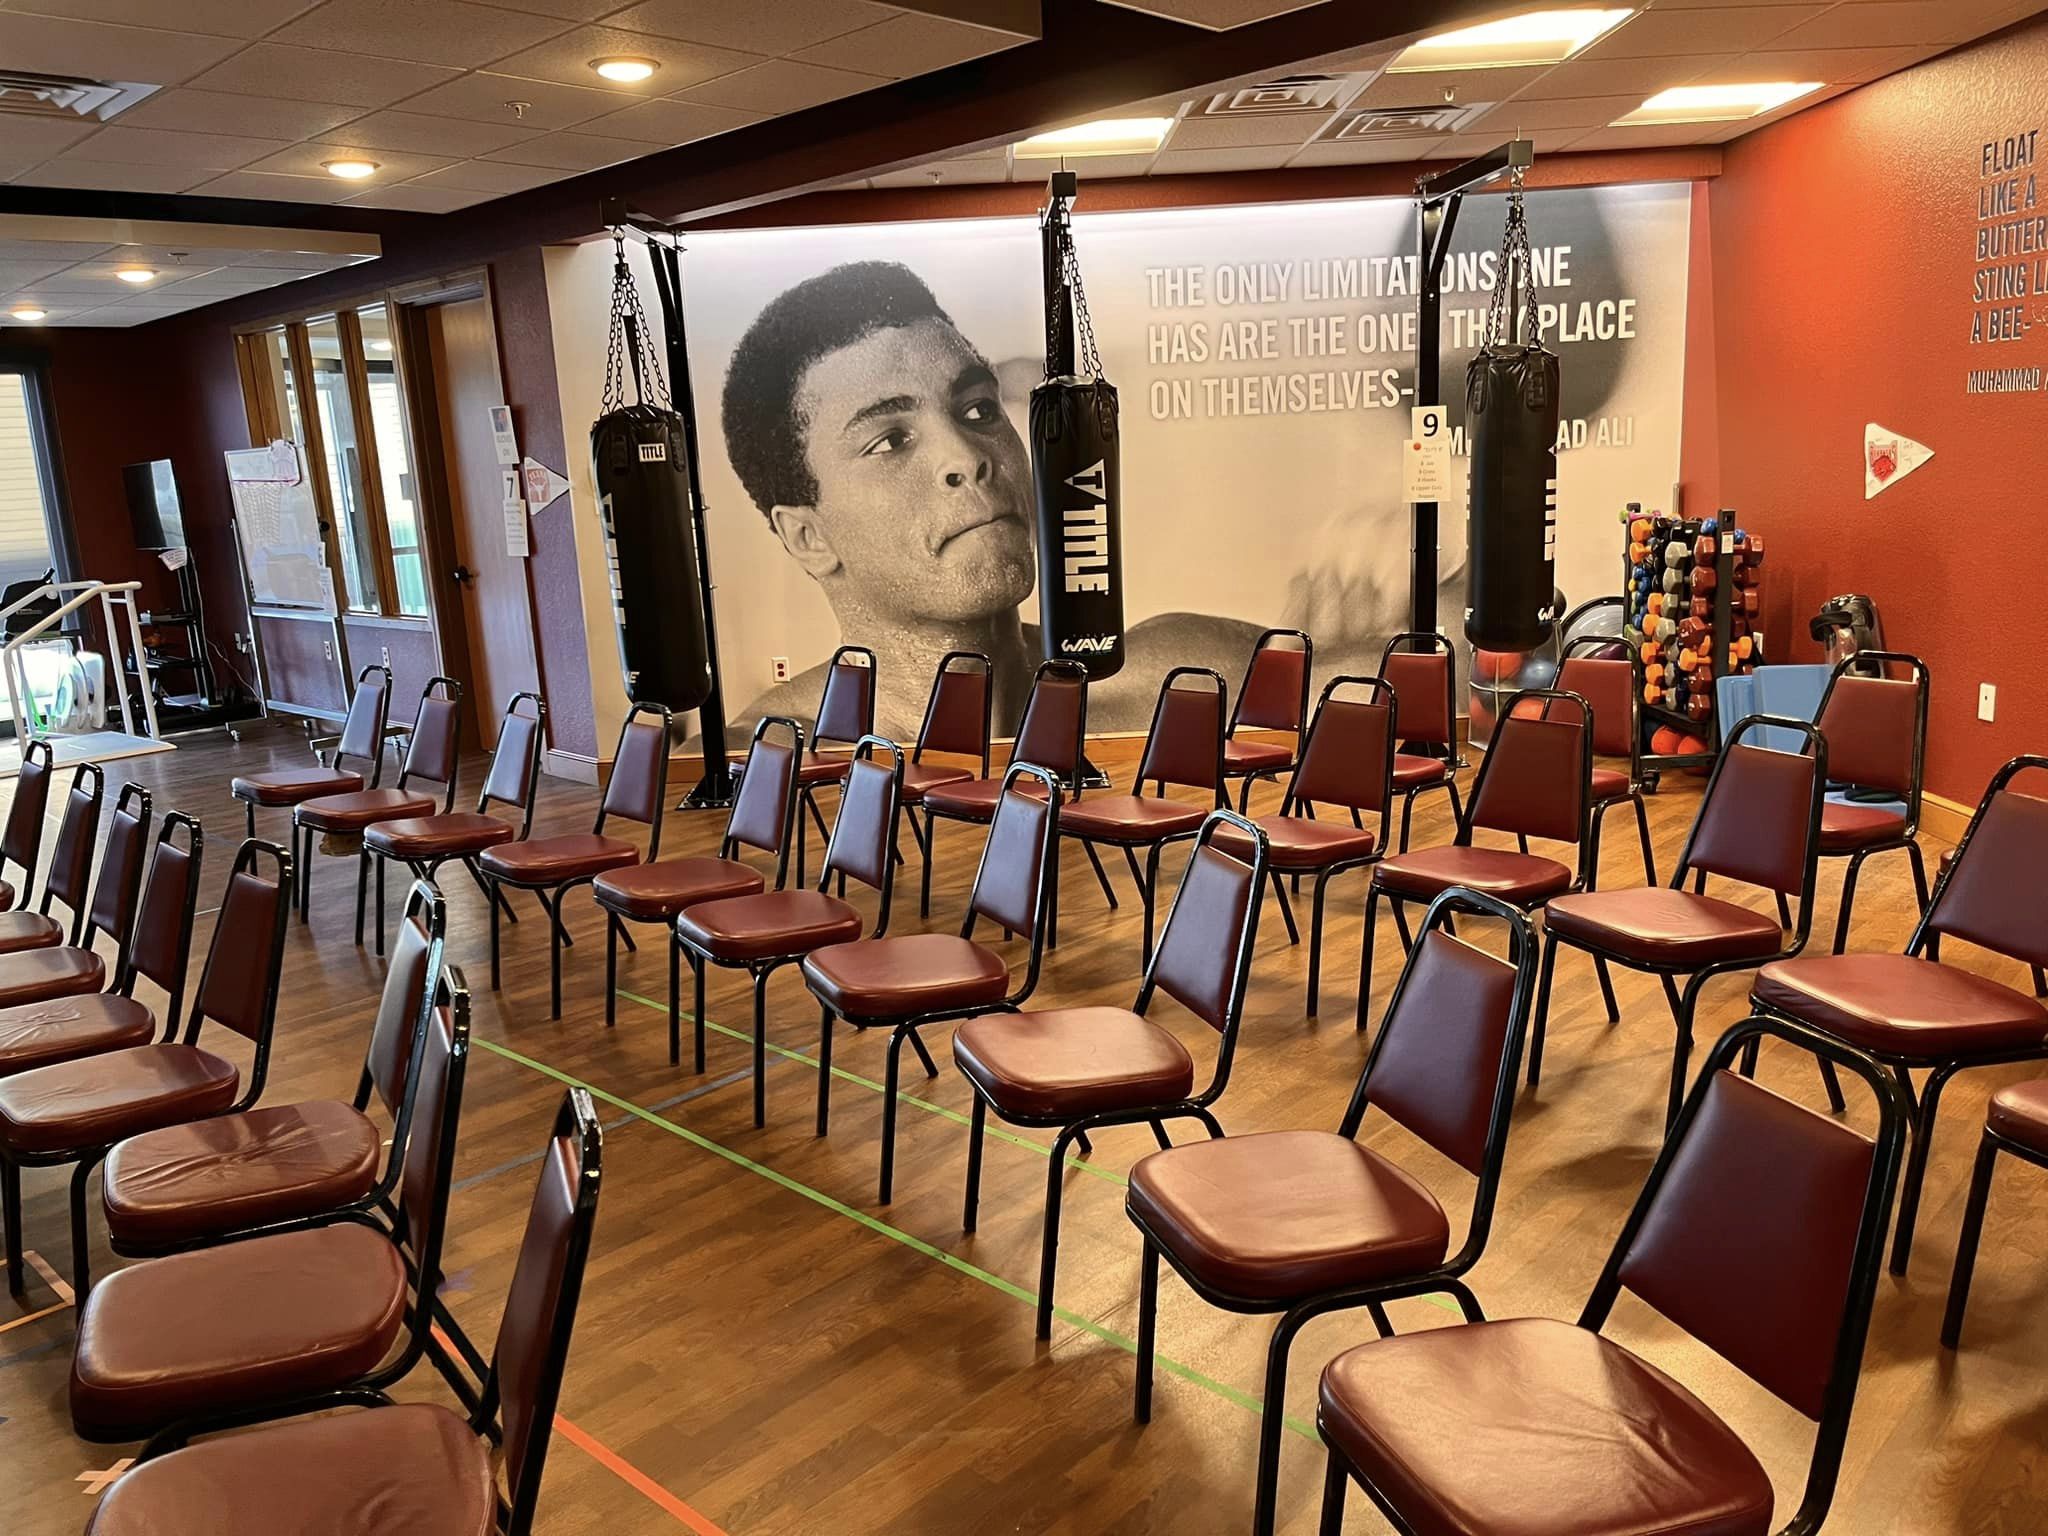 The Lodge hosts the Rock Steady Boxing Program for those with Parkinson's.  They have a beautiful workout room at The Lodge, and it was used for presentations at the event!